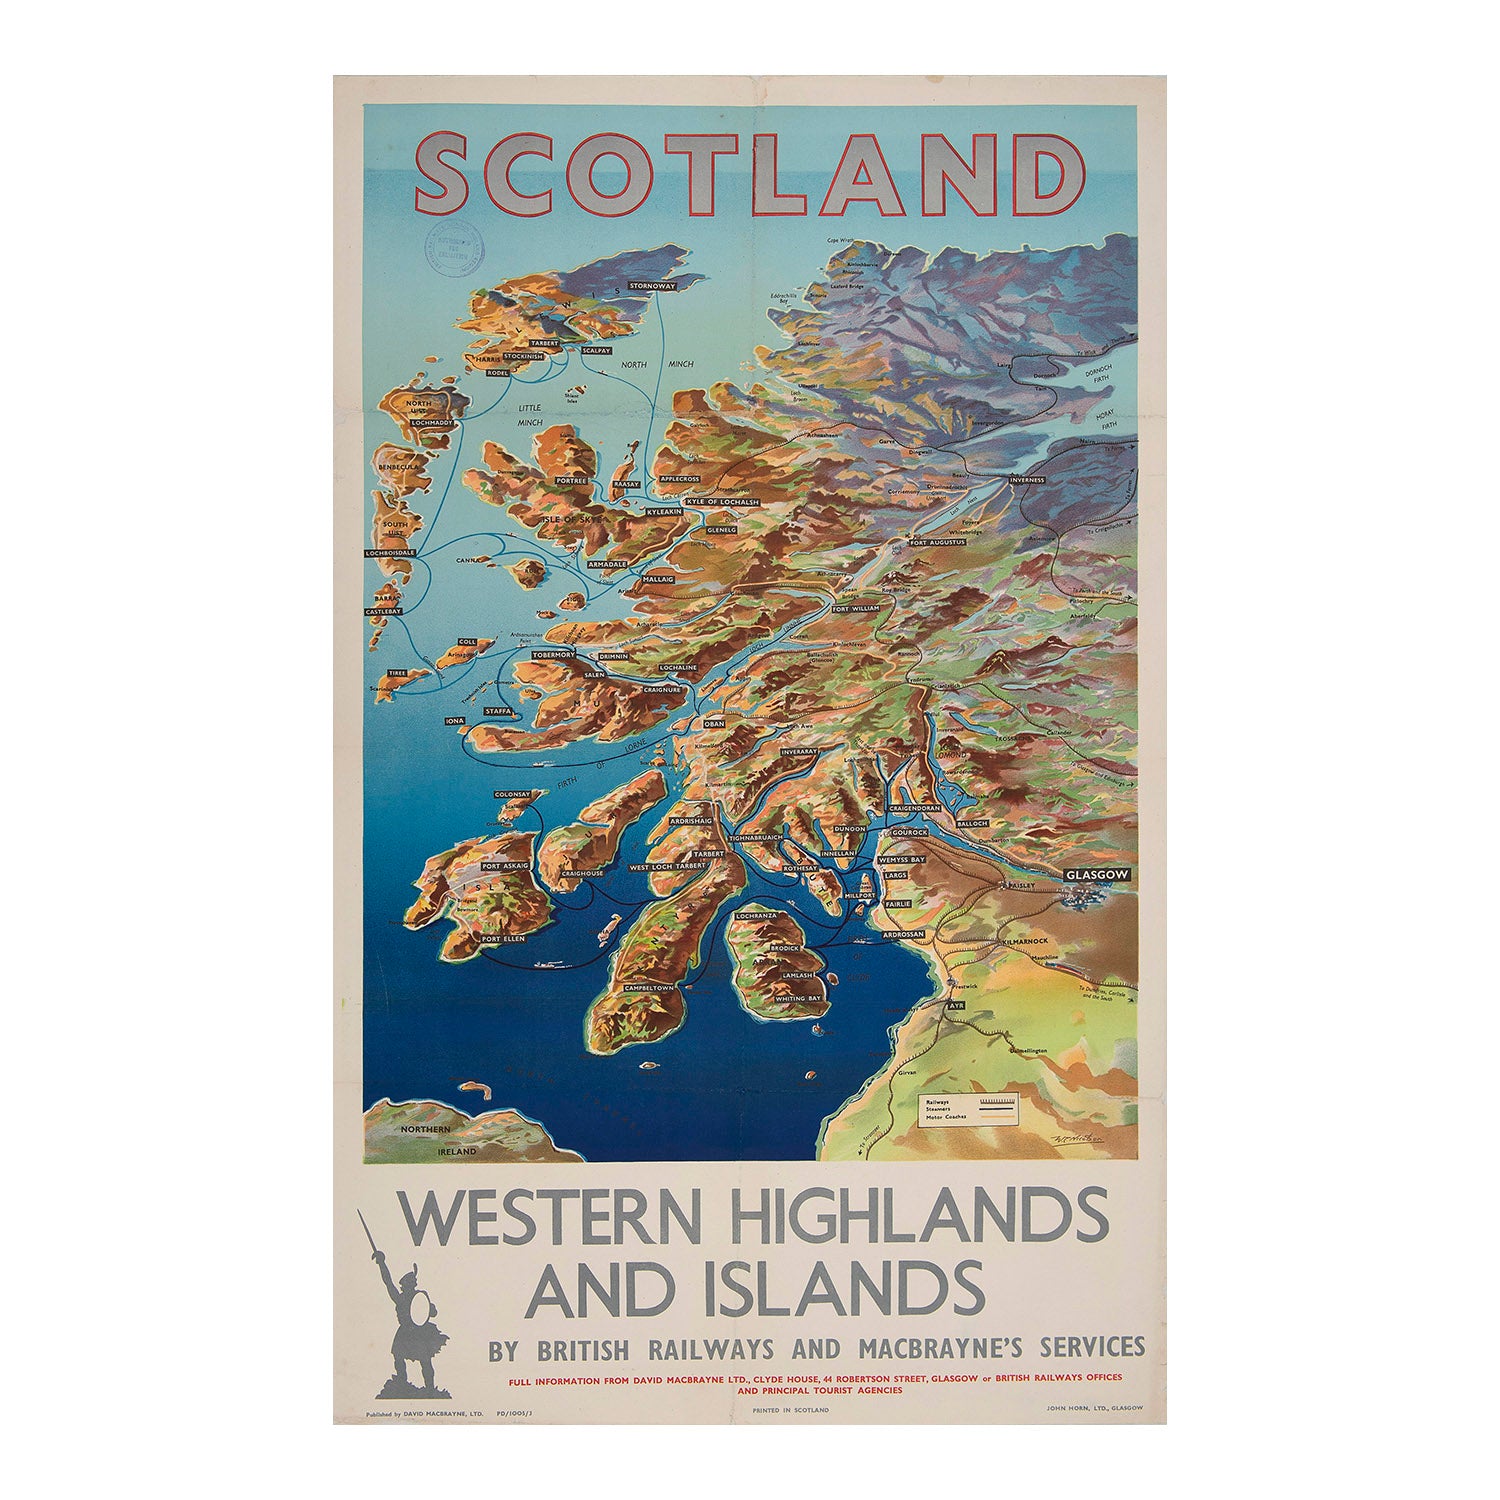 Scotland Western Highlands and Islands, painted by W Nicolson and published by David Macbrayne Services Ltd and British Railways, c.1955. The relief map design depicts the passenger steamship routes operated by Macbrayne Services Ltd, together with the connecting rail and coach routes. A splendid poster that impressively represents the extent of the islands making up this part of western Scotland